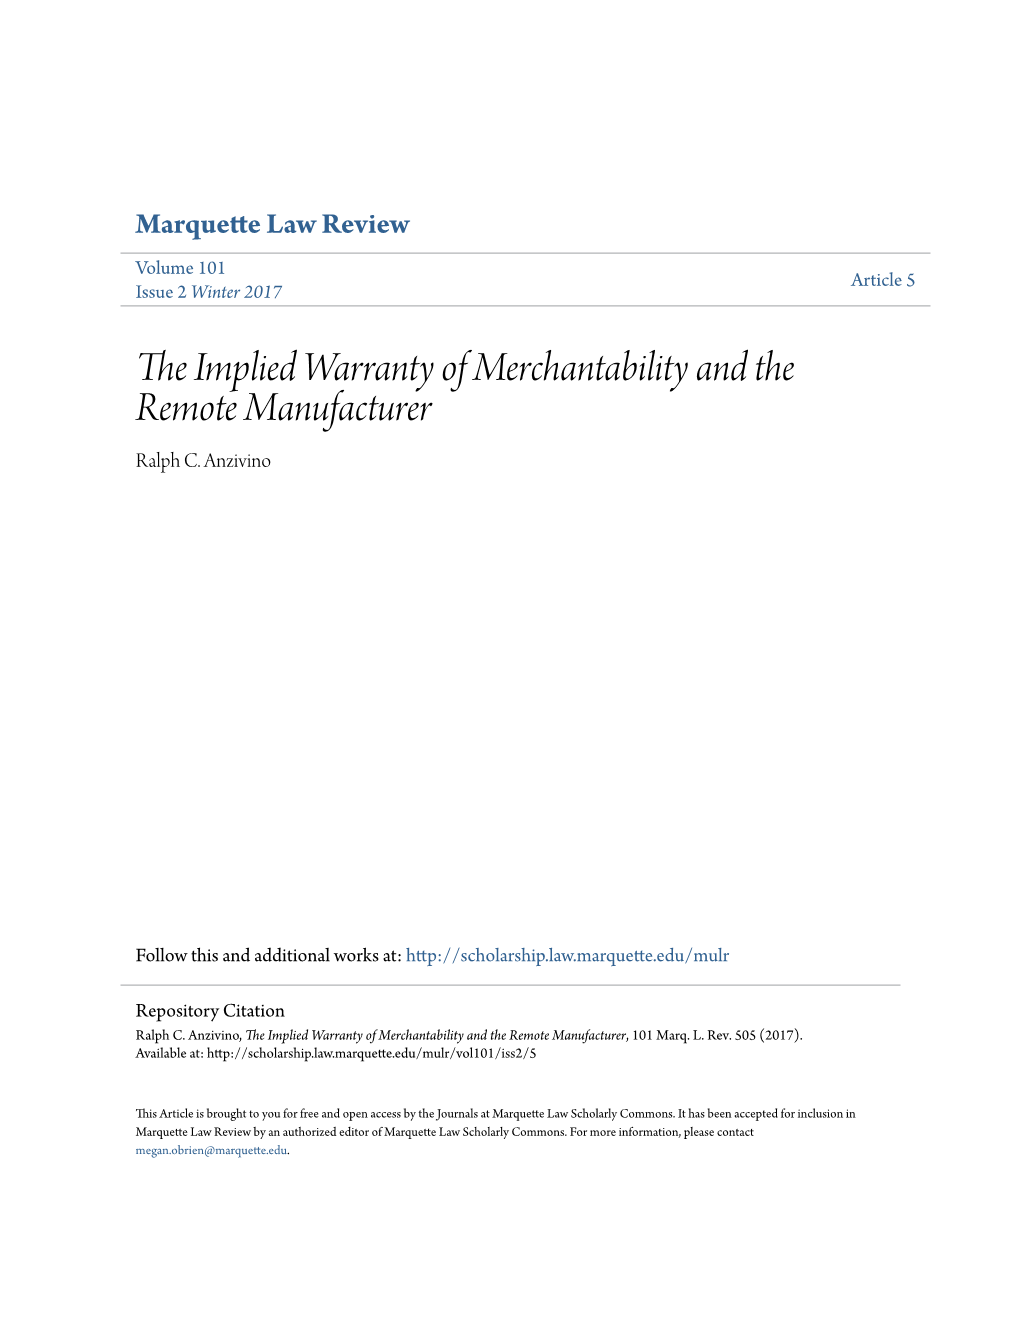 &lt;I&gt;The Implied Warranty of Merchantability and the Remote